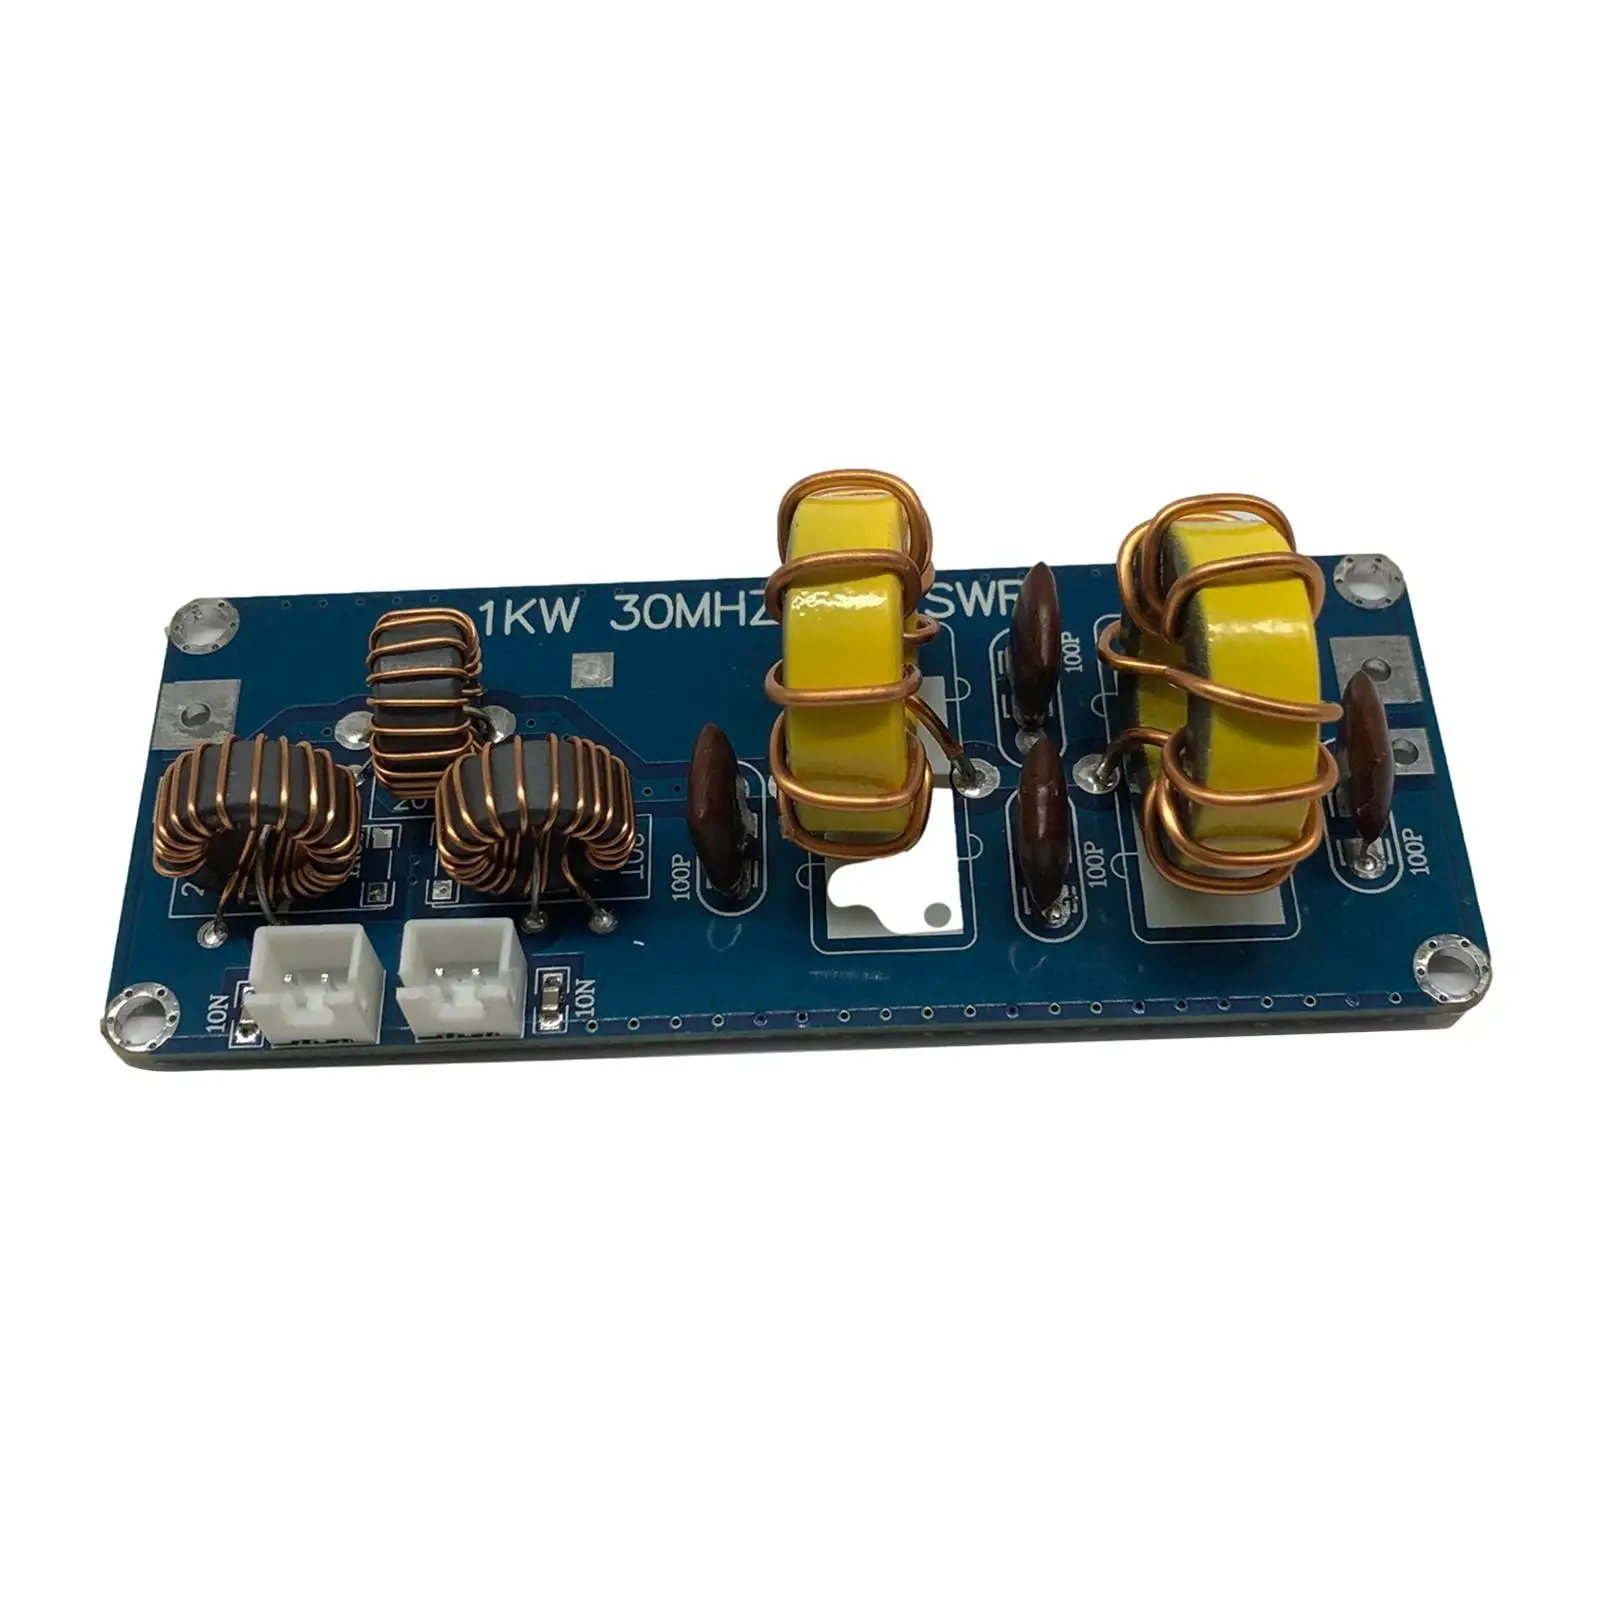 DIY Kits Lpf 1000W 1kW  Low Pass Filter Blue ,Moulding ,Accessories Filtering Board for HF Power Ssb Amplifier ,HF Power Supply